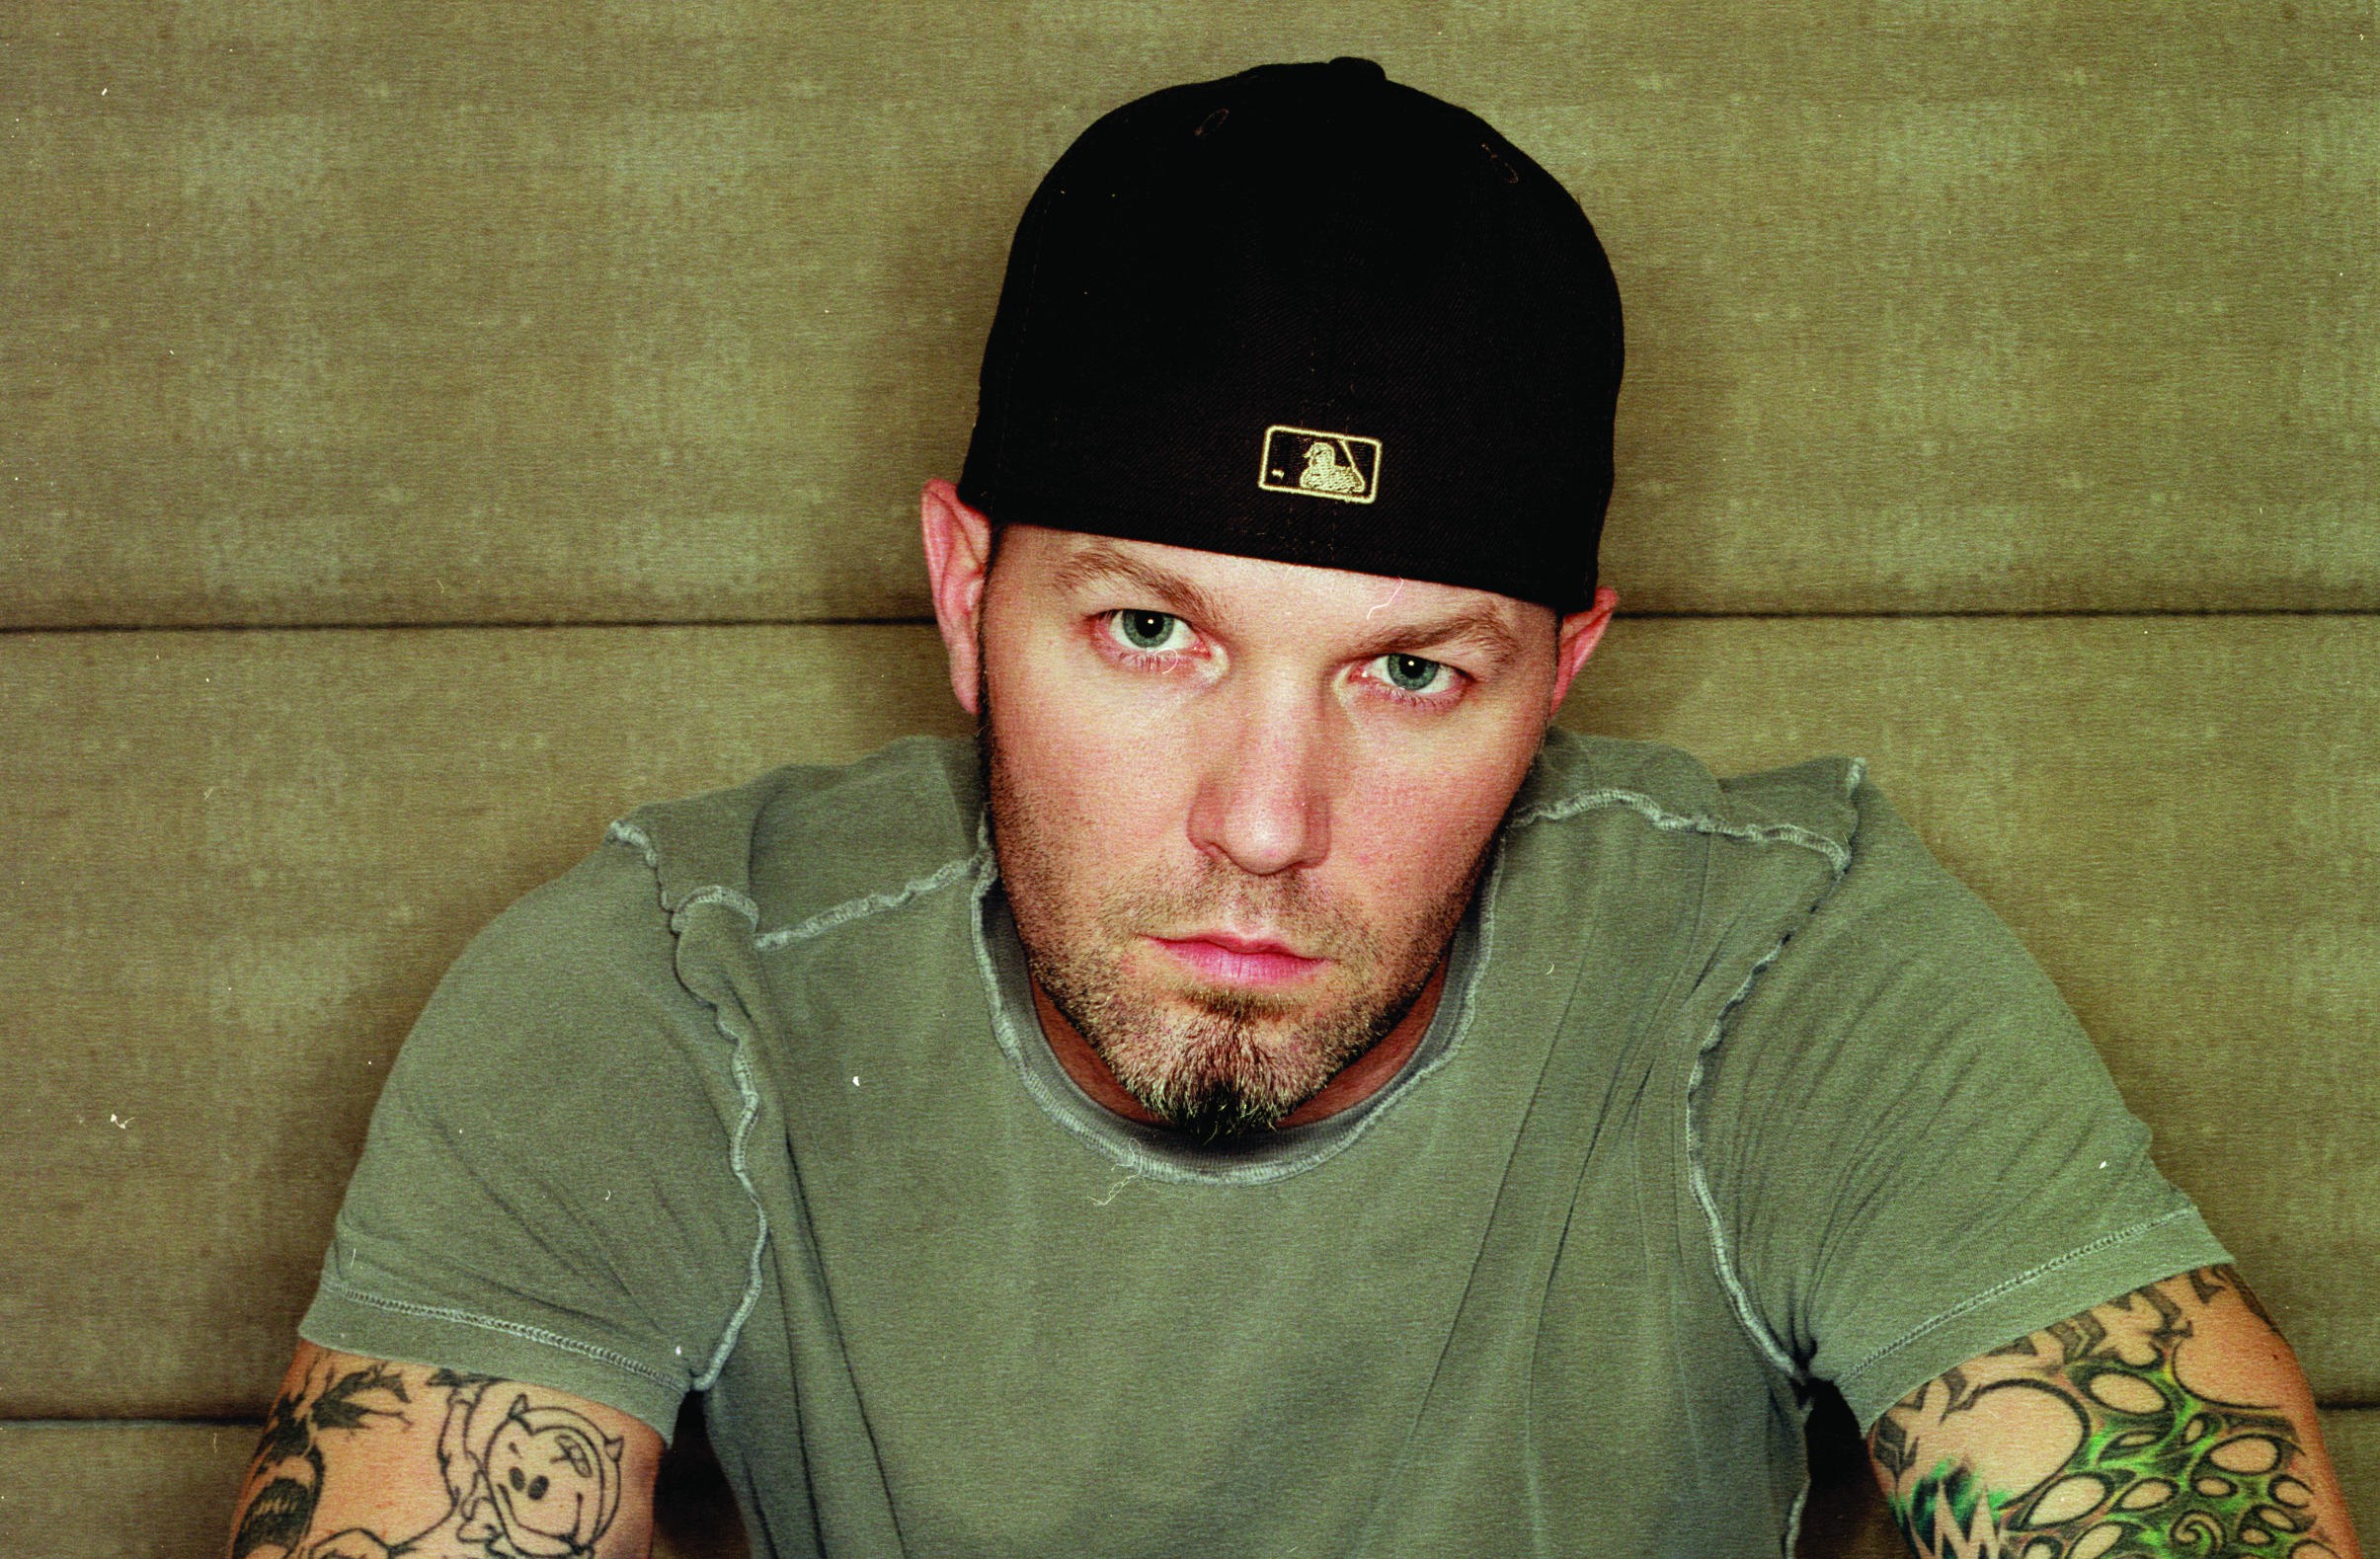 Fred Durst, the frontman for the band Limp Bizkit, had a video of him and an unknown woman having sex leaked onto the internet by a repairman who had been repairing his computer.